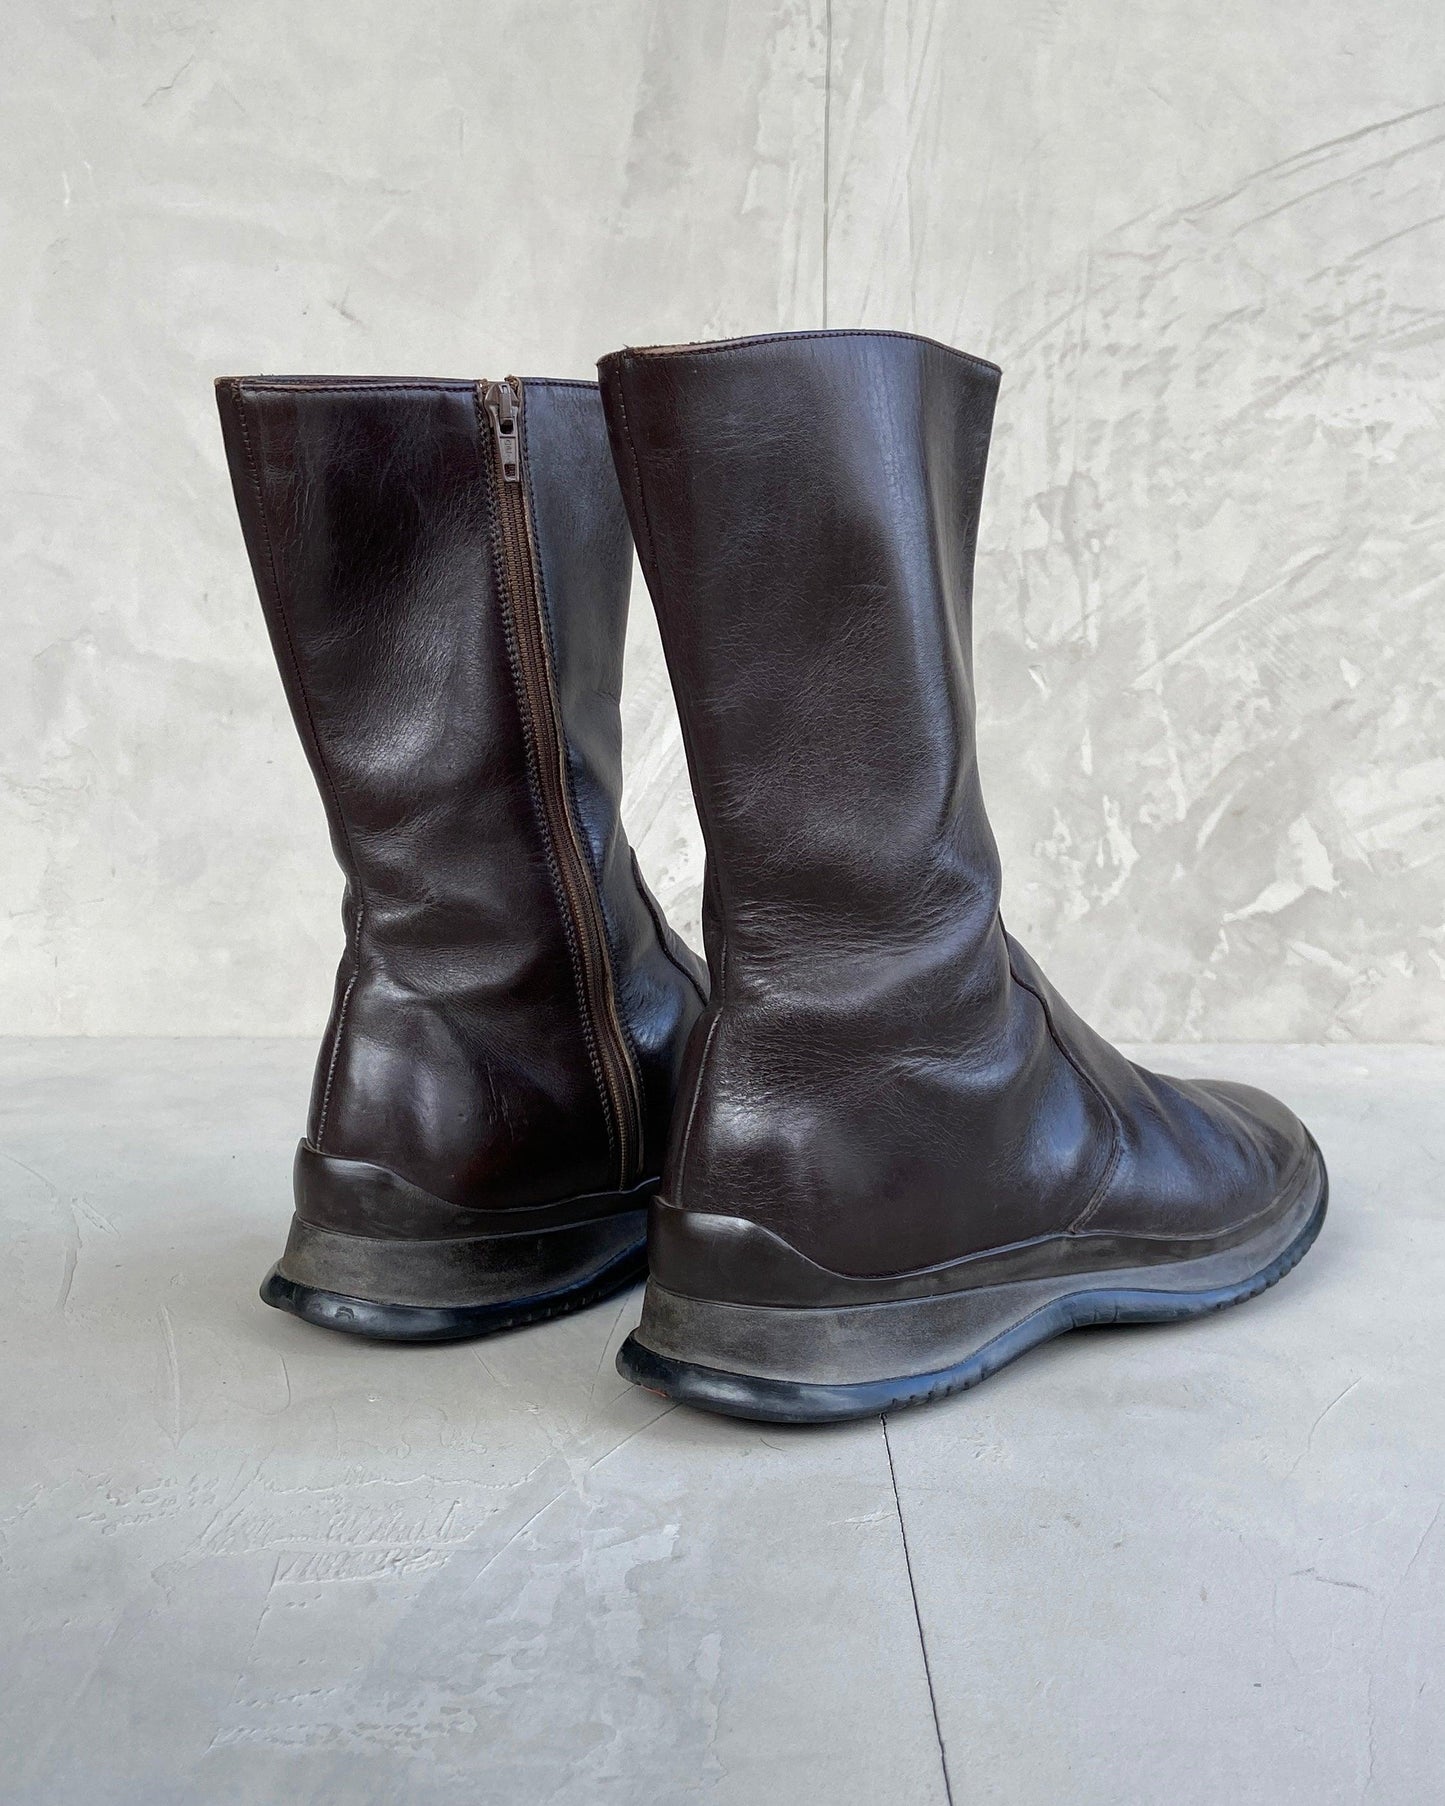 PRADA BROWN LEATHER CHUNKY SOLE BOOTS - EU 40 / UK 7 - Known Source